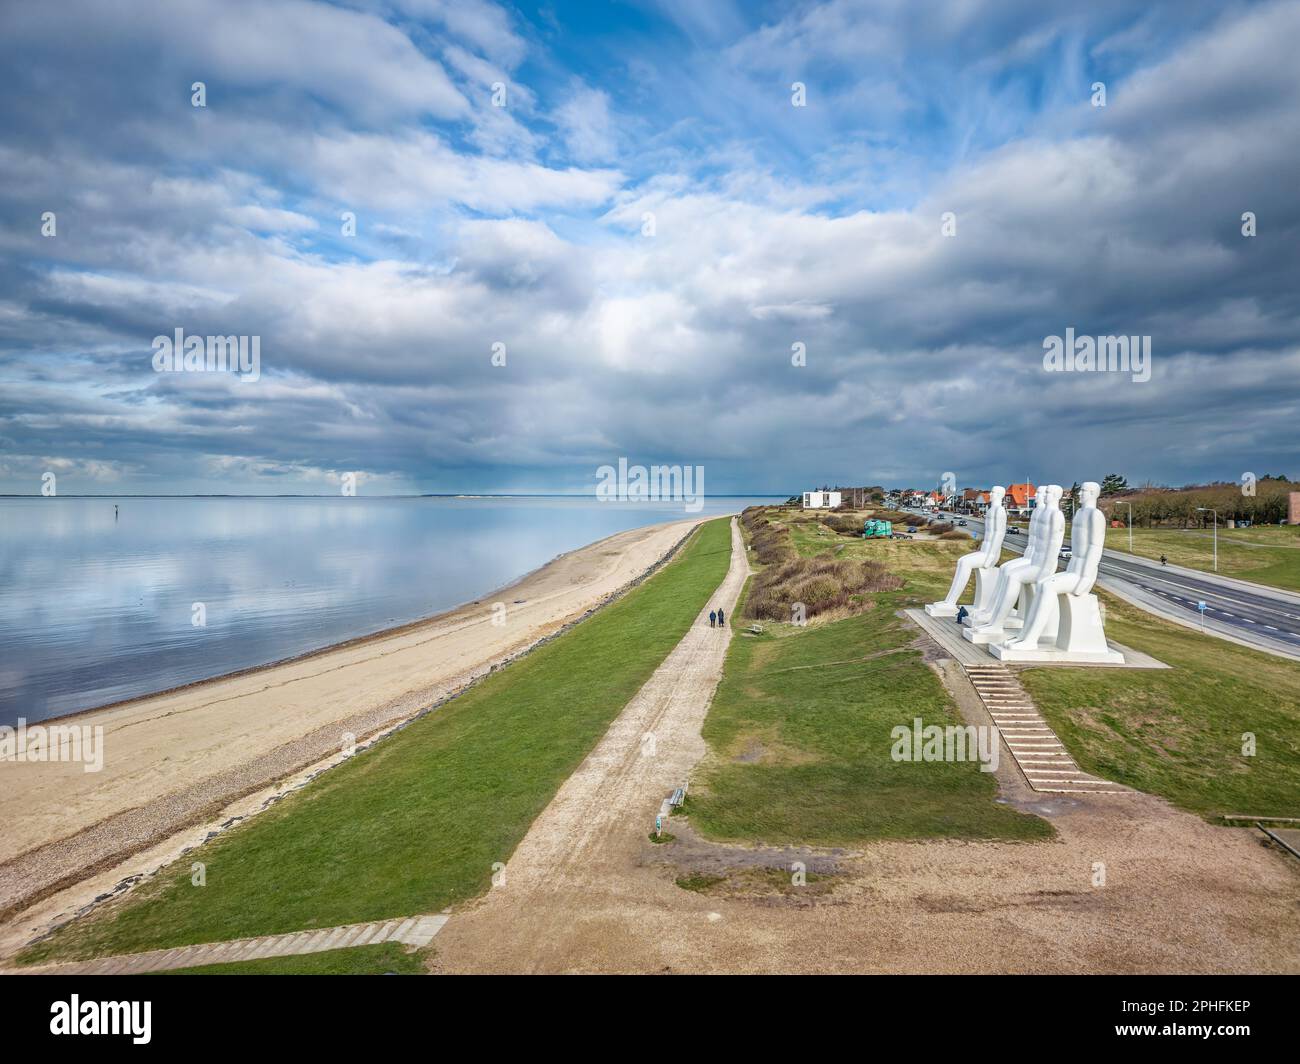 Extra muros - Page 9 Men-a-sea-colossal-statues-in-esbjerg-harbor-denmark-2PHFKEP